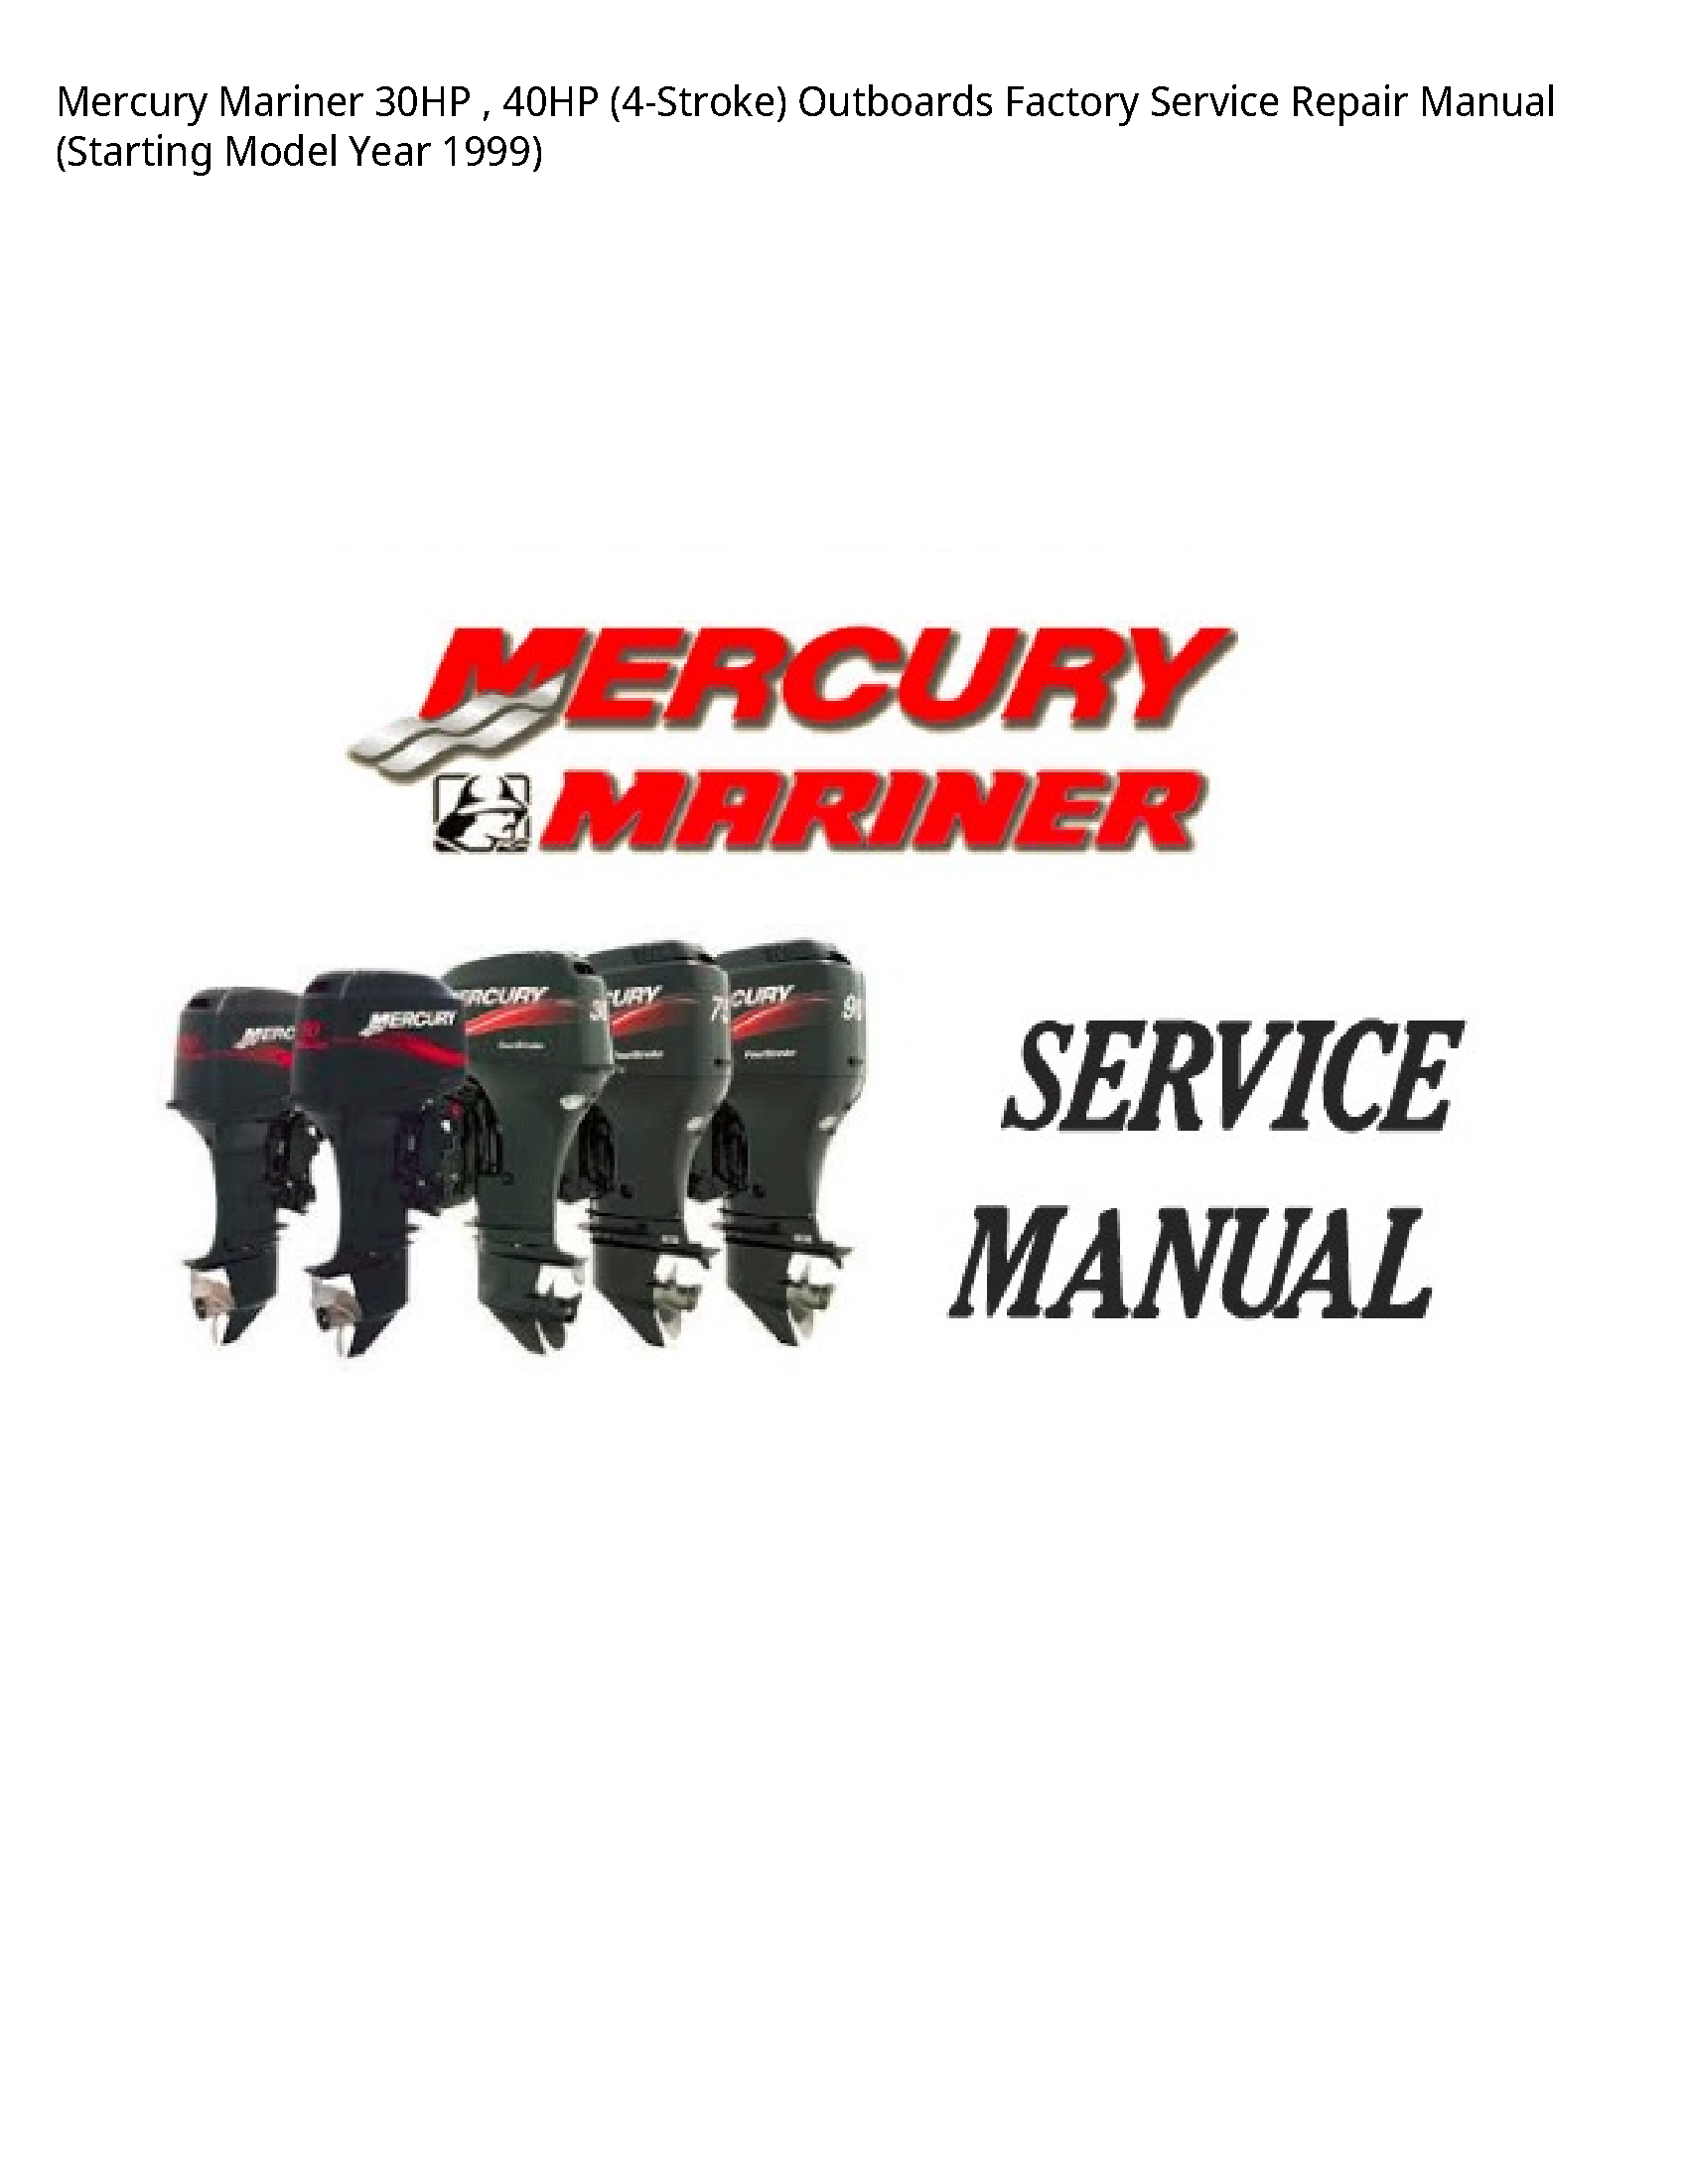 Mercury Mariner 30HP Outboards Factory manual